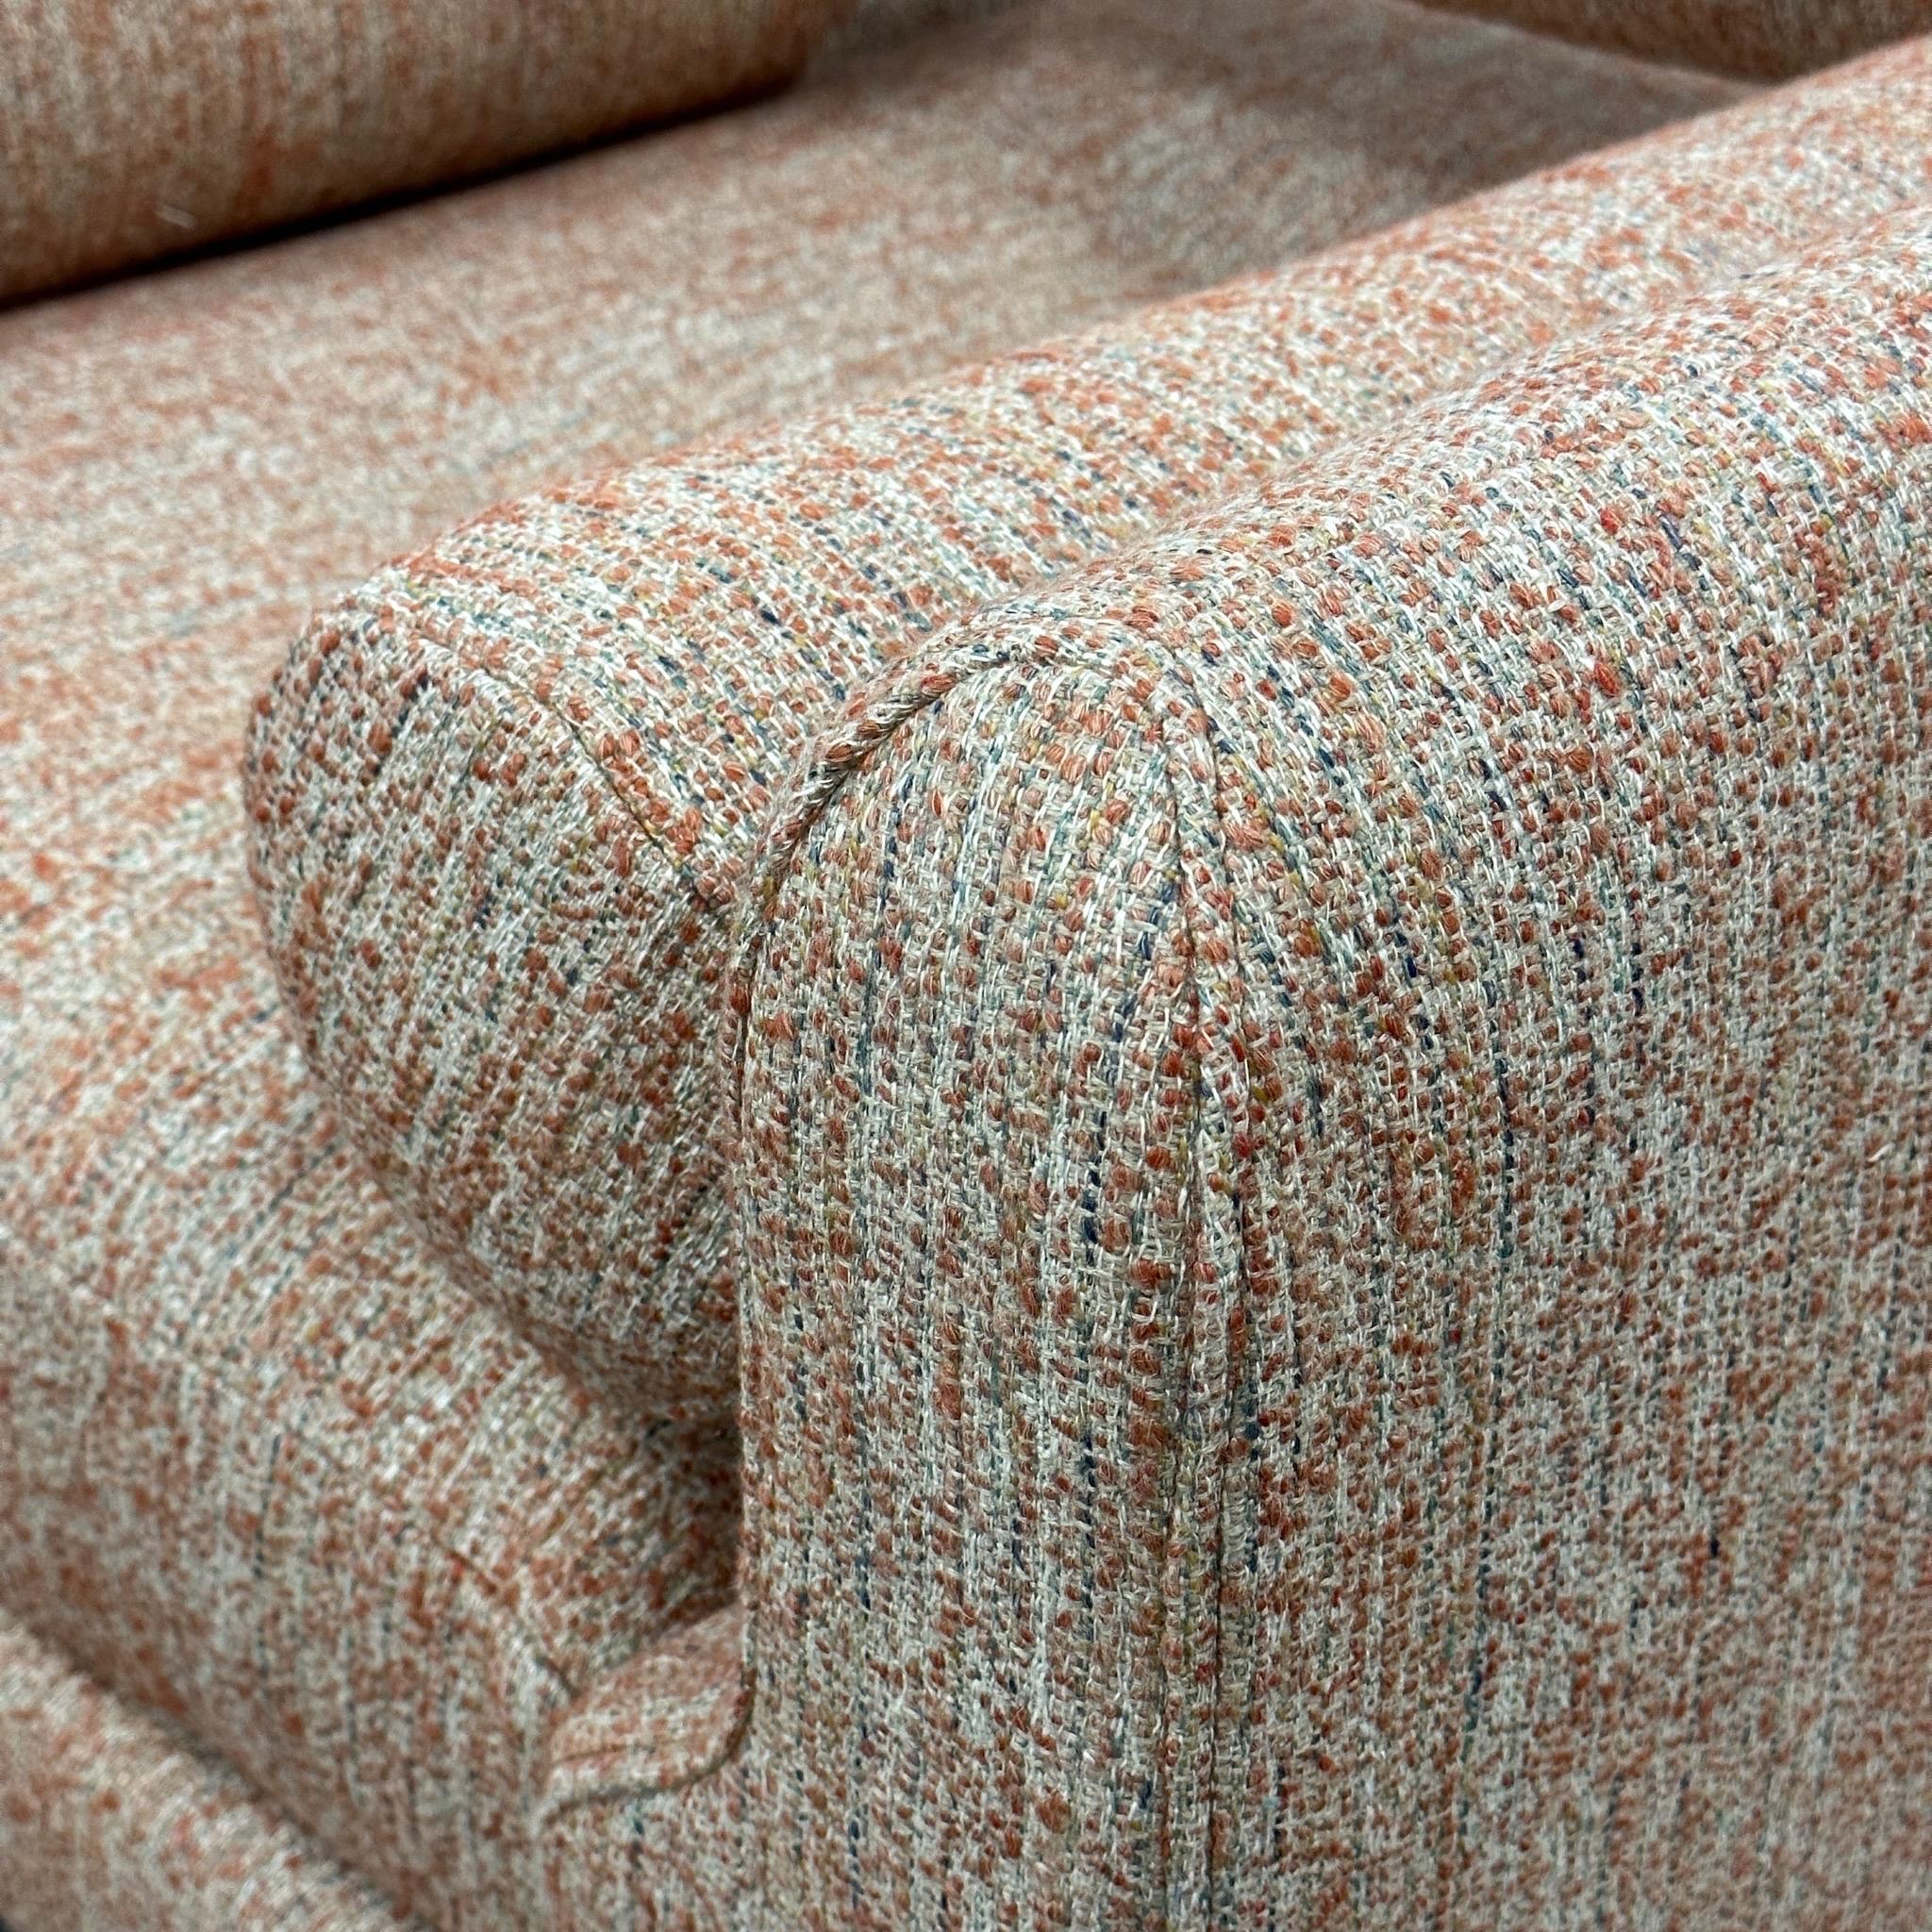 c. 2000s. Reupholstered in orange/grey nubby wool boucle. Removable armrests and backrest. Made in USA. 